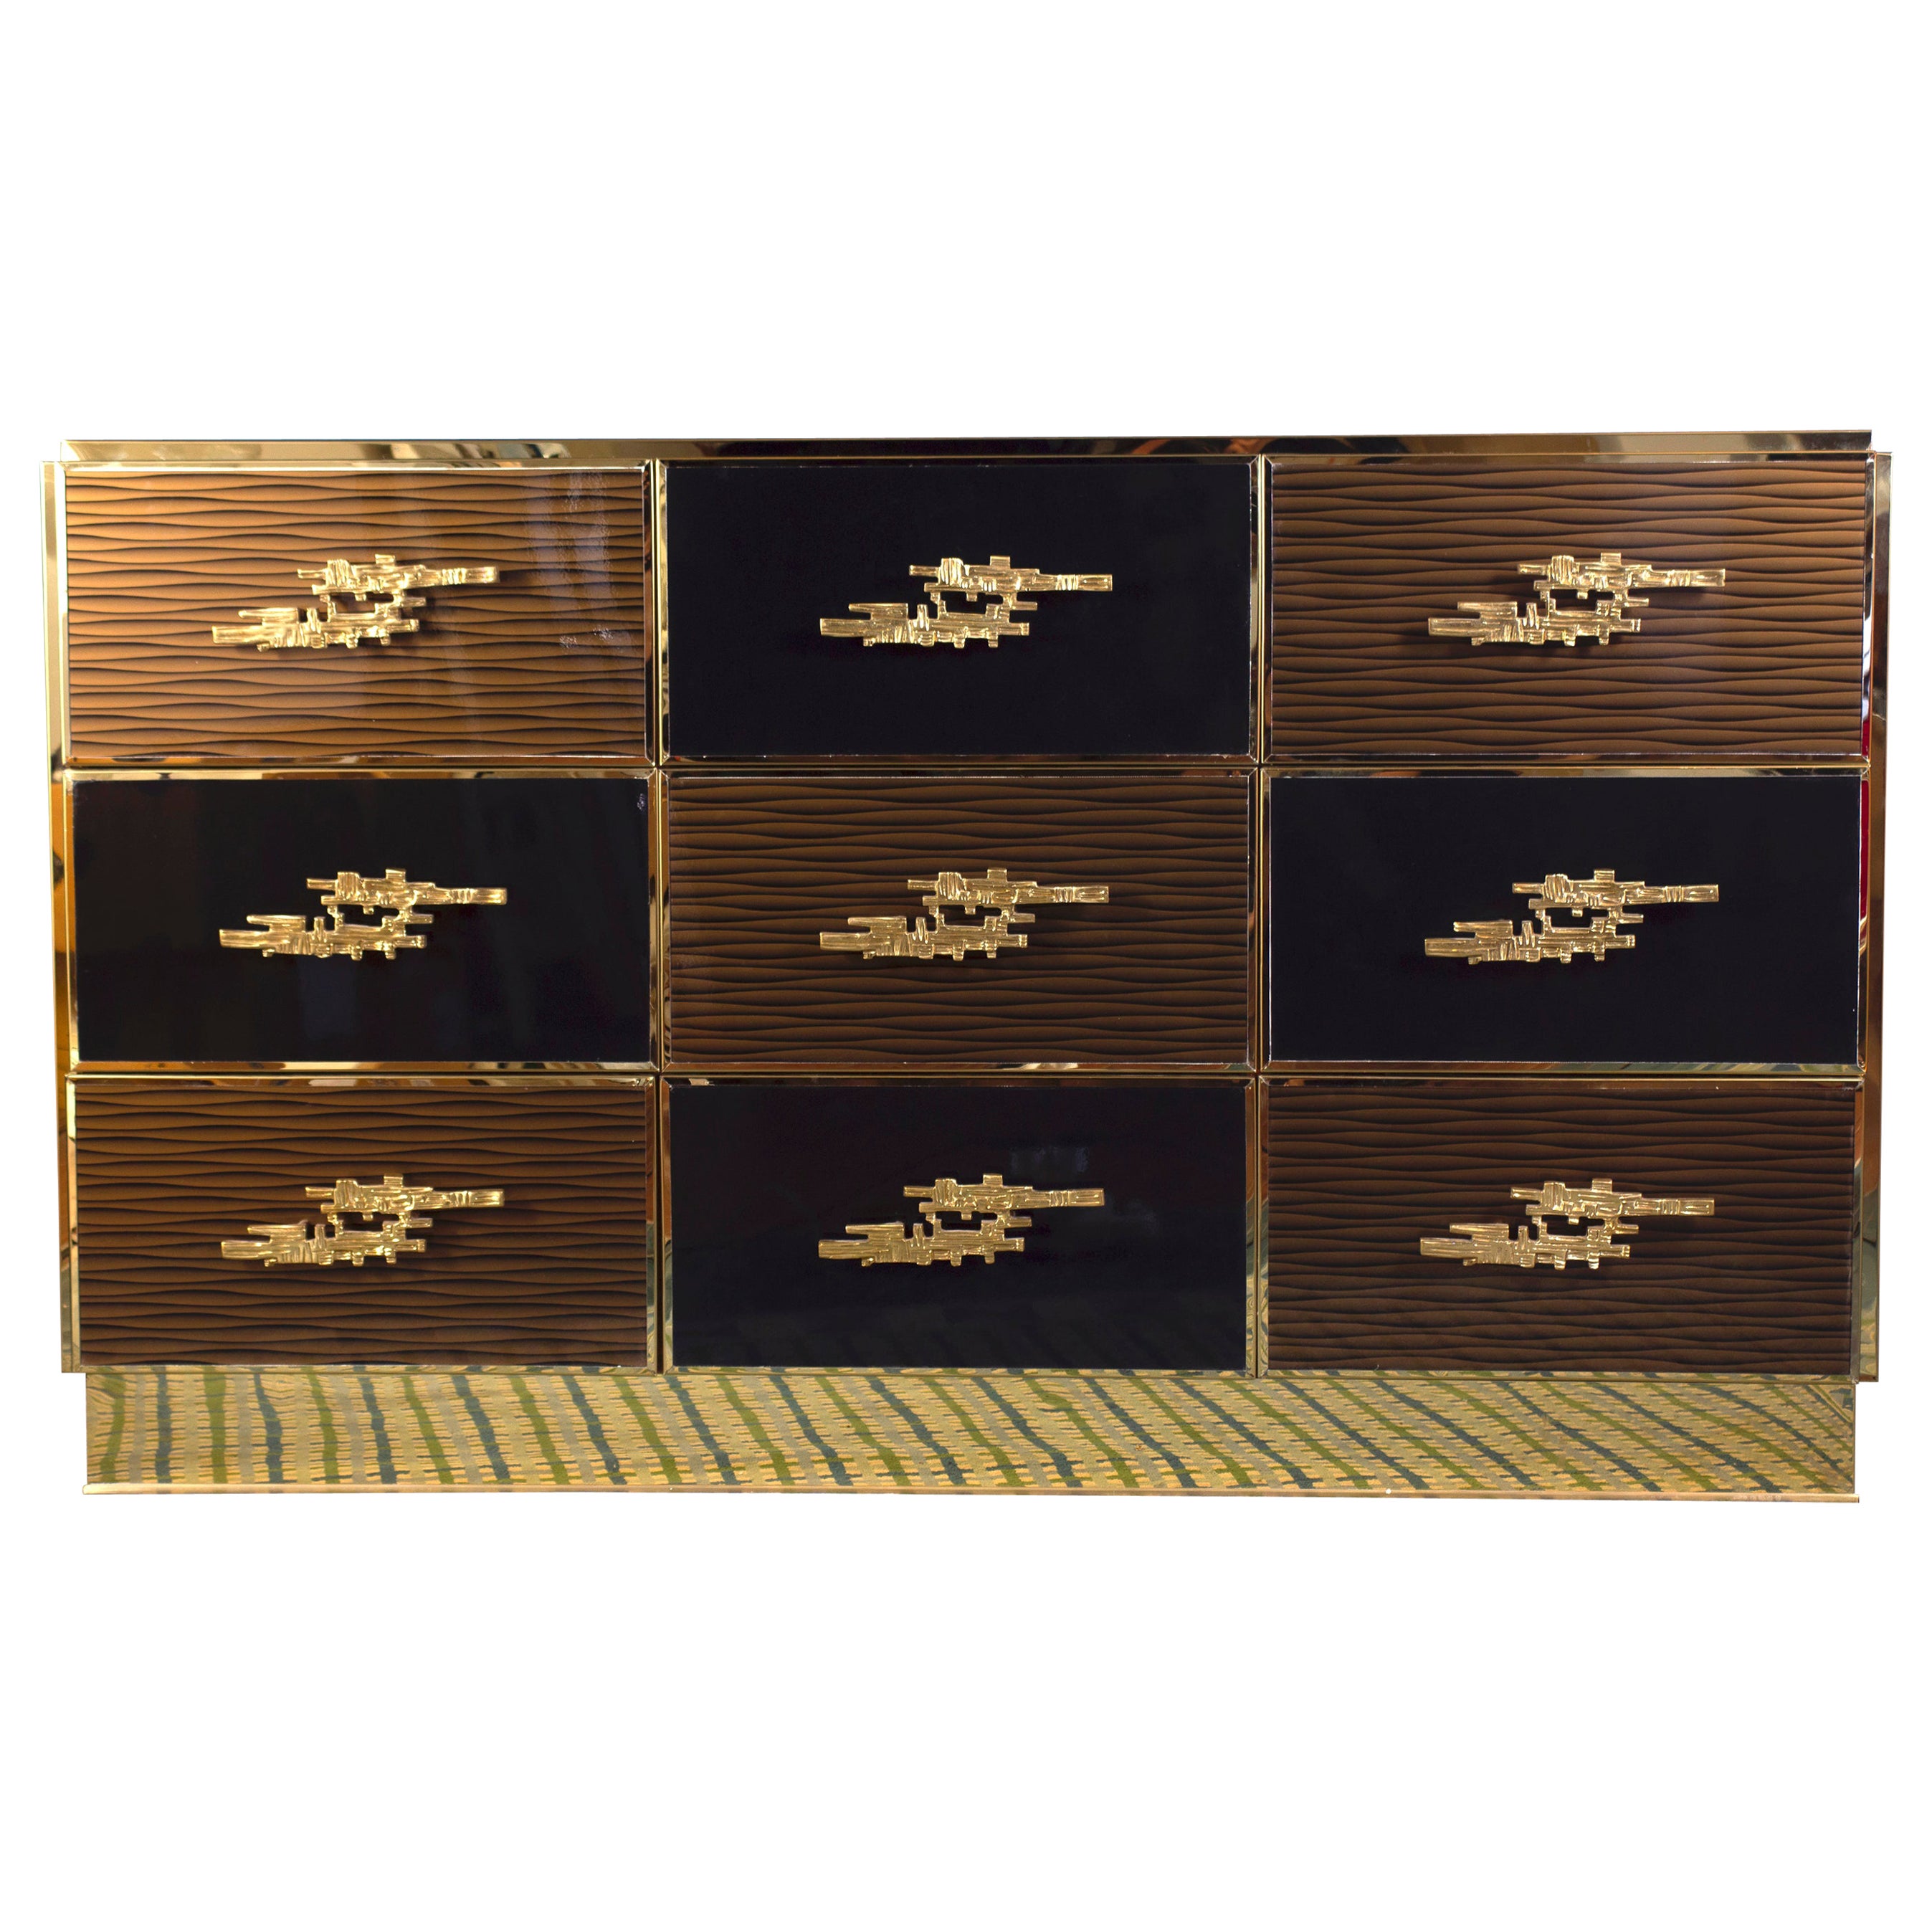 Large Midcentury Style Brass and Wood Imitation Chest of Drawer 2020